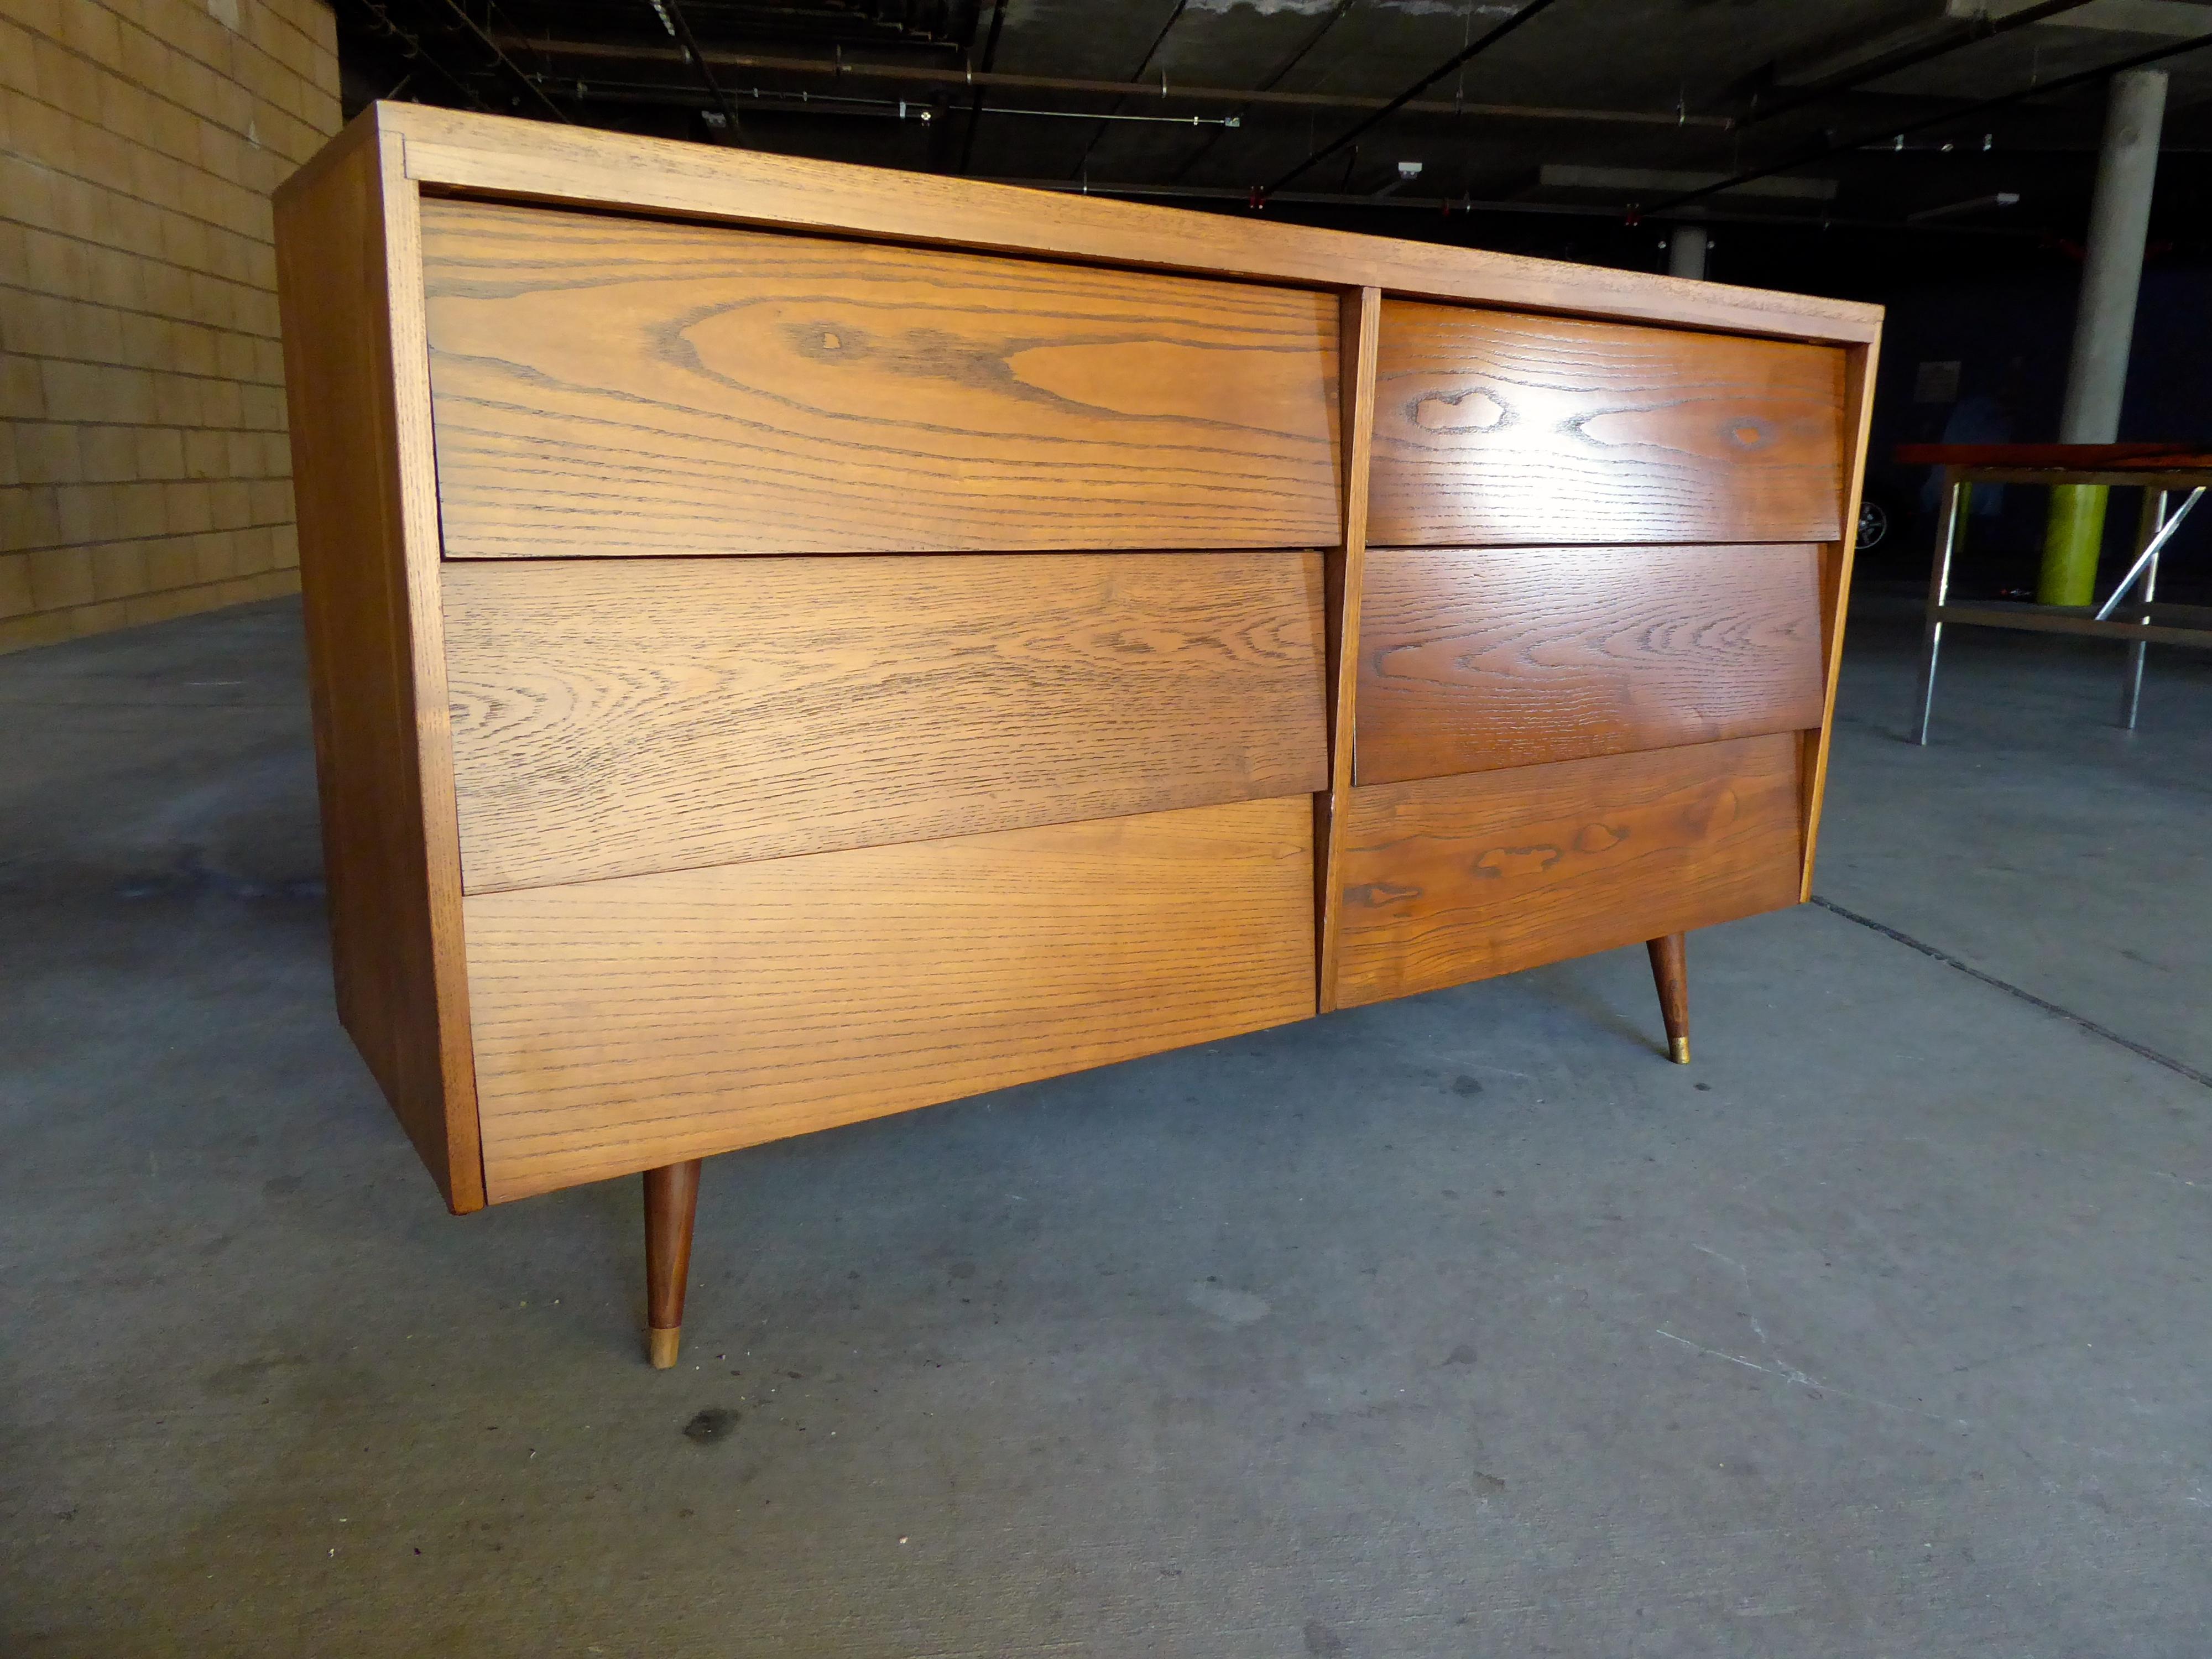 A vintage slat-front stained oak dresser with brass-capped feet, circa 1960s. The chest would be perfect for a second bedroom or for a stylish child's room.